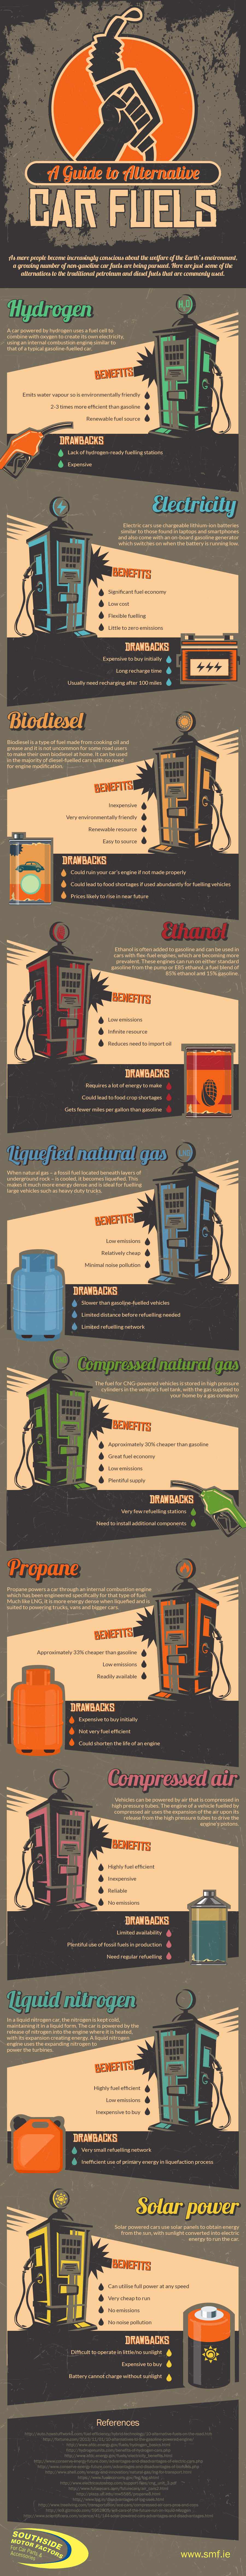 A Guide to Alternative Car Fuels - Infographic